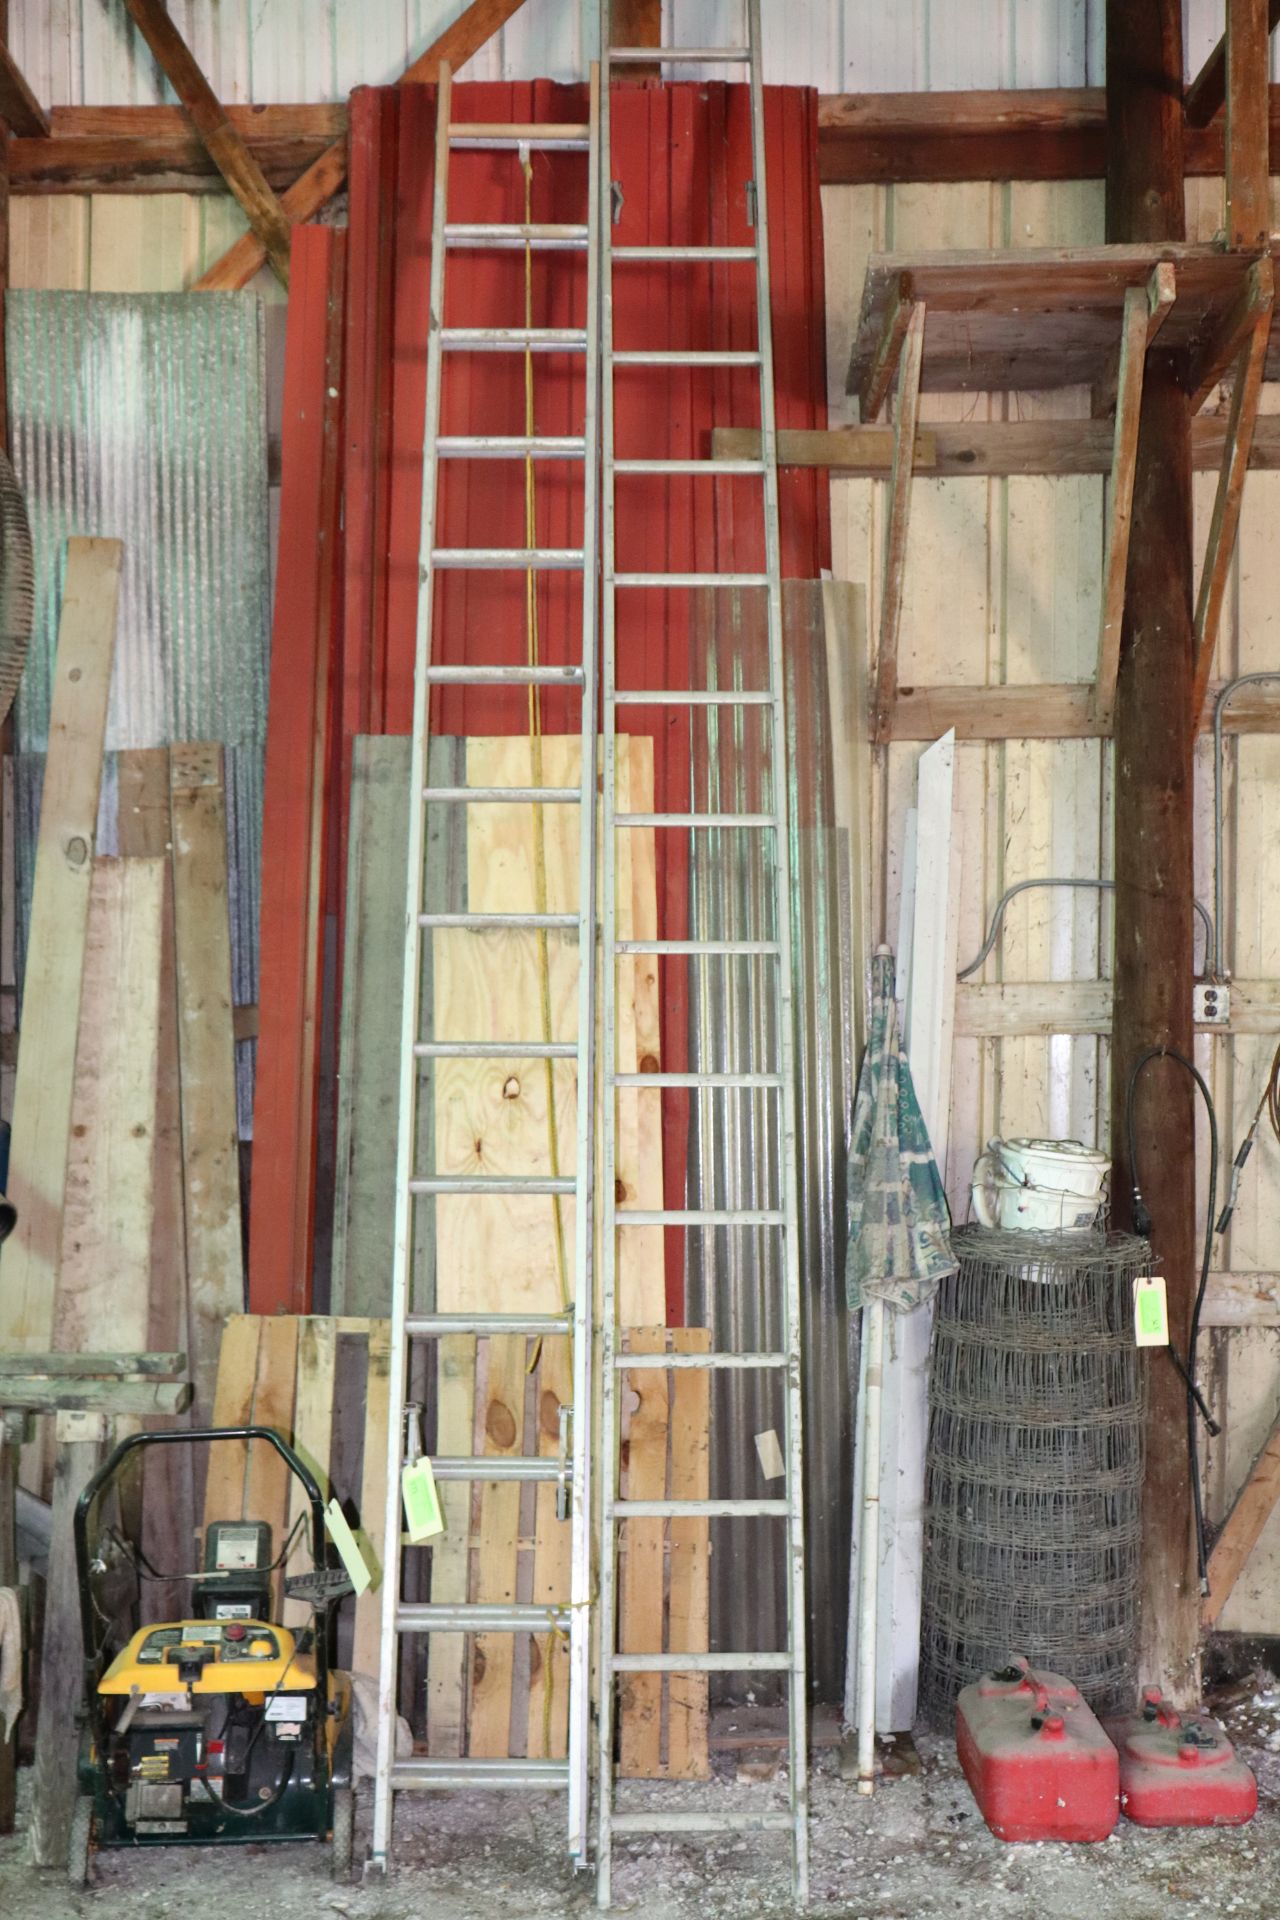 Extension and a half extension ladder